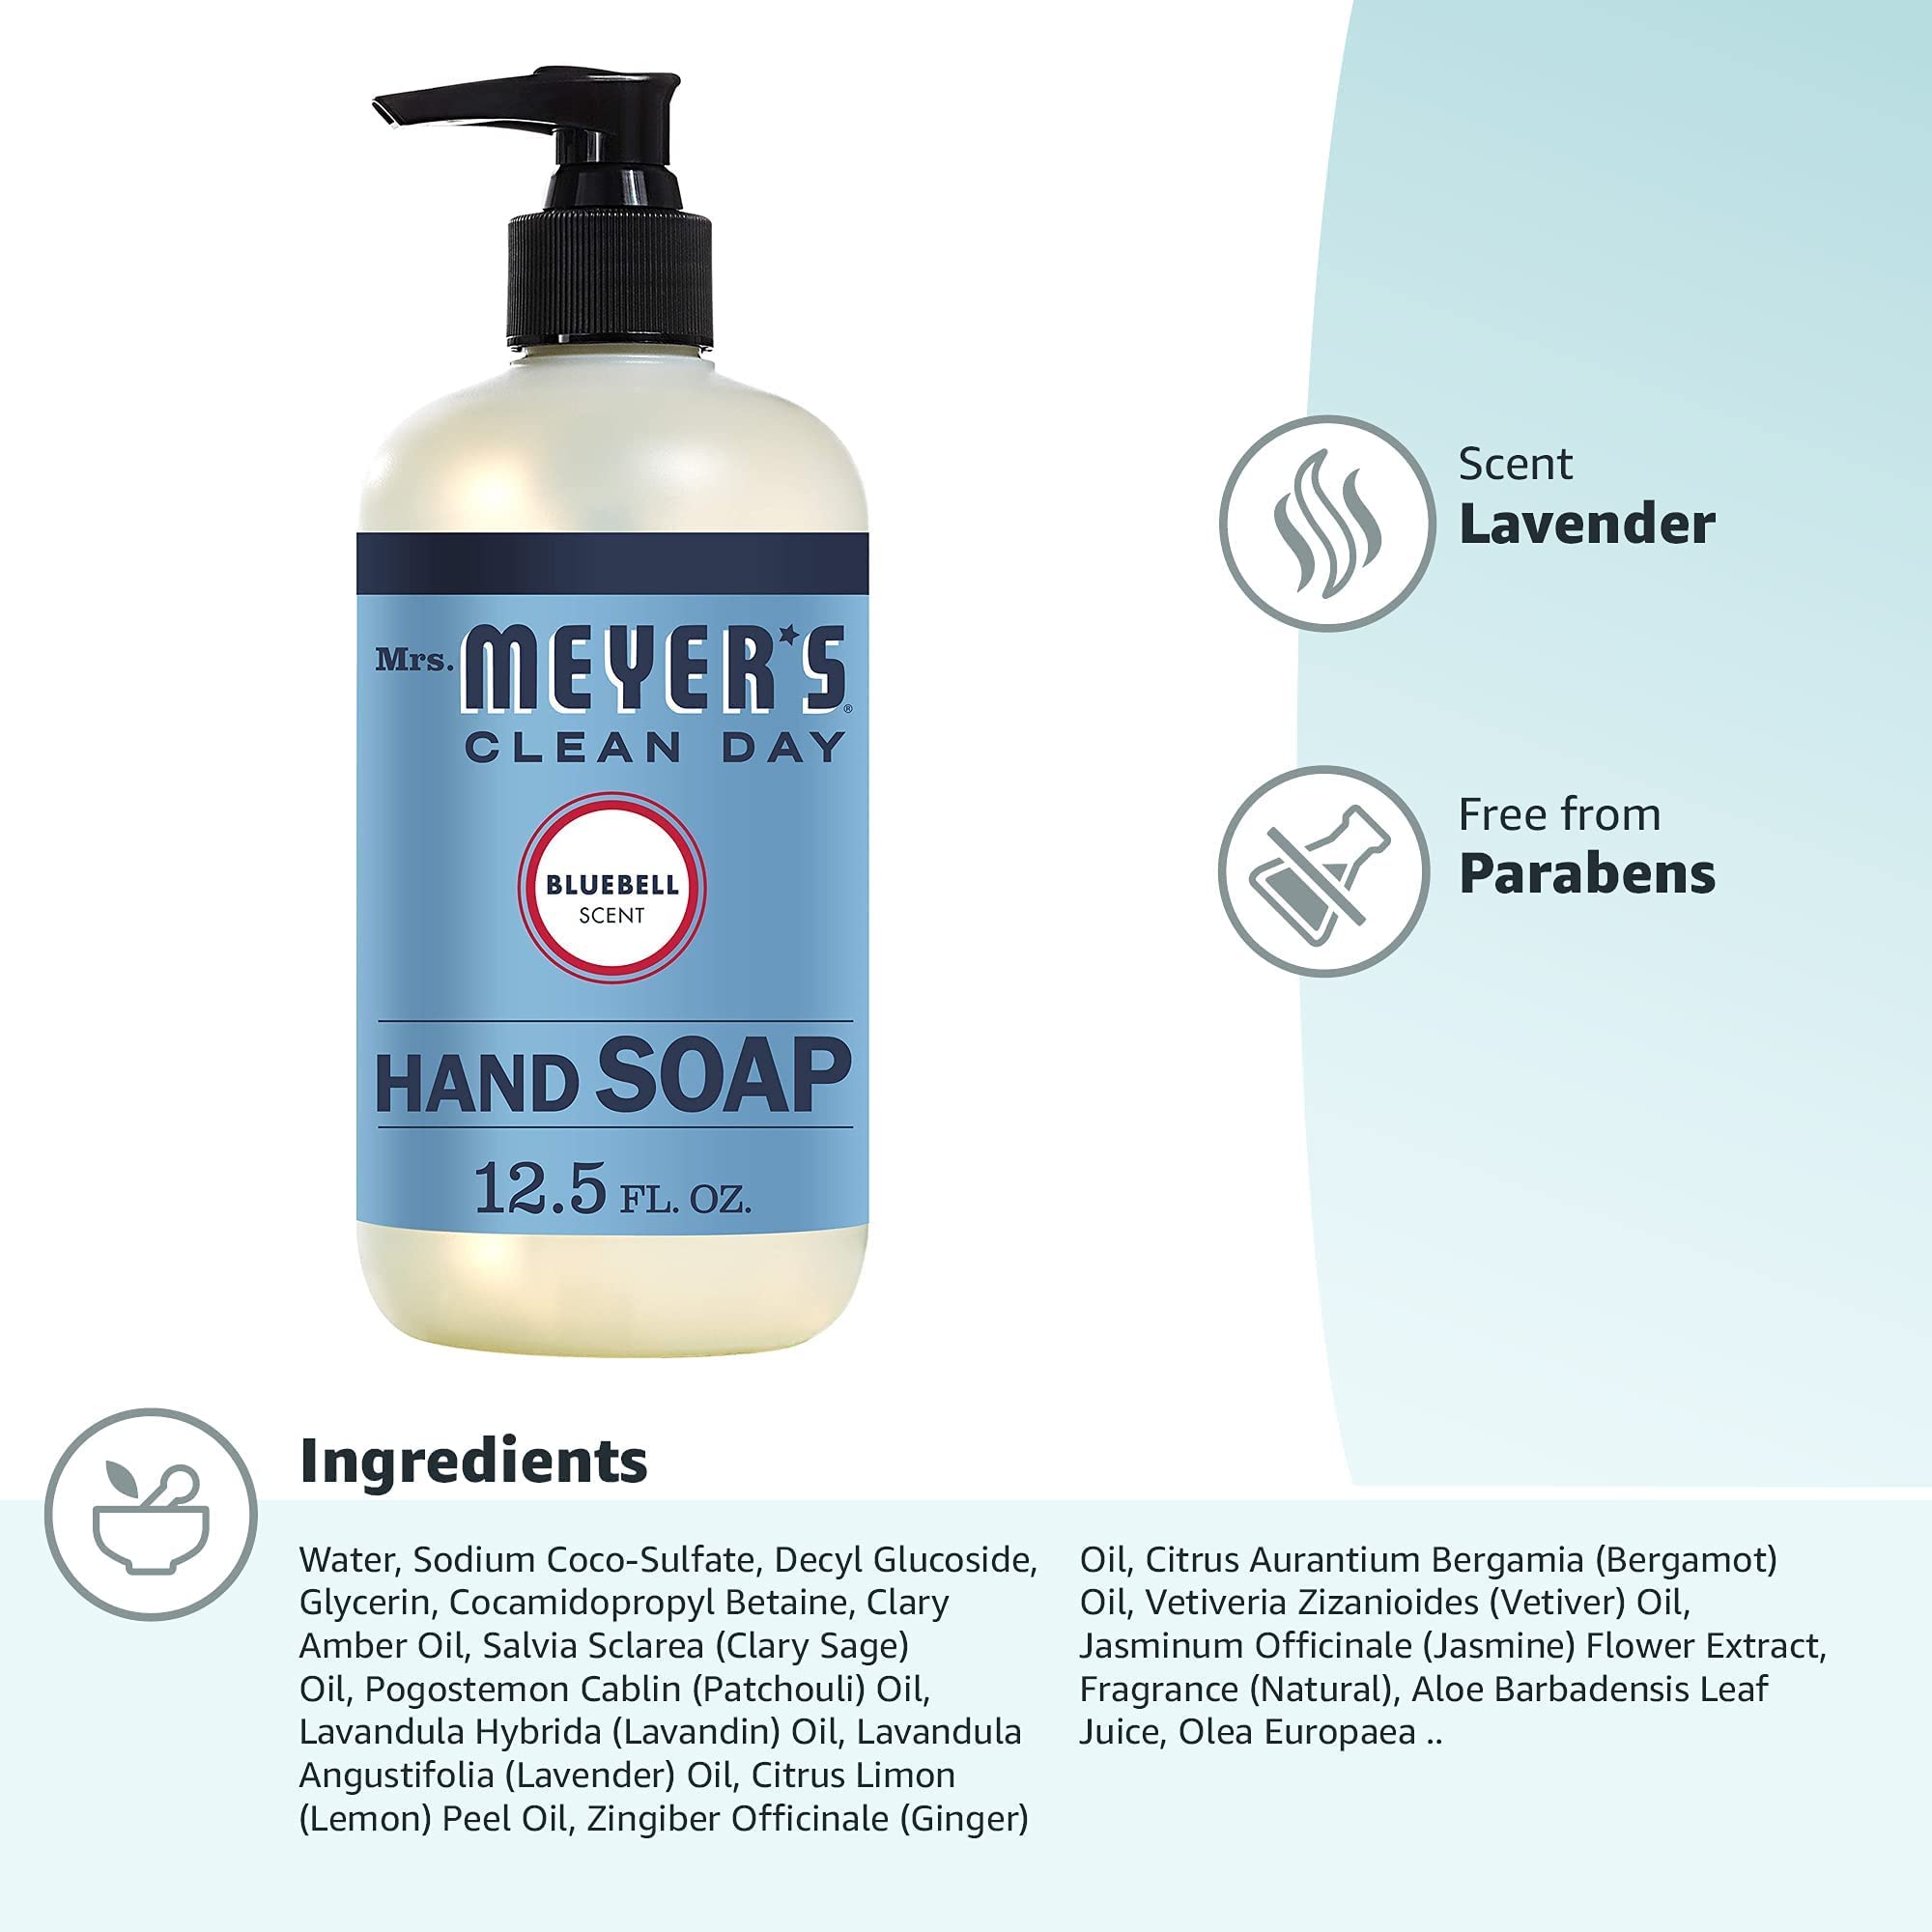 Mrs. Meyer's Hand Soap, Made with Essential Oils, Biodegradable Formula, Bluebell, 12.5 fl. oz